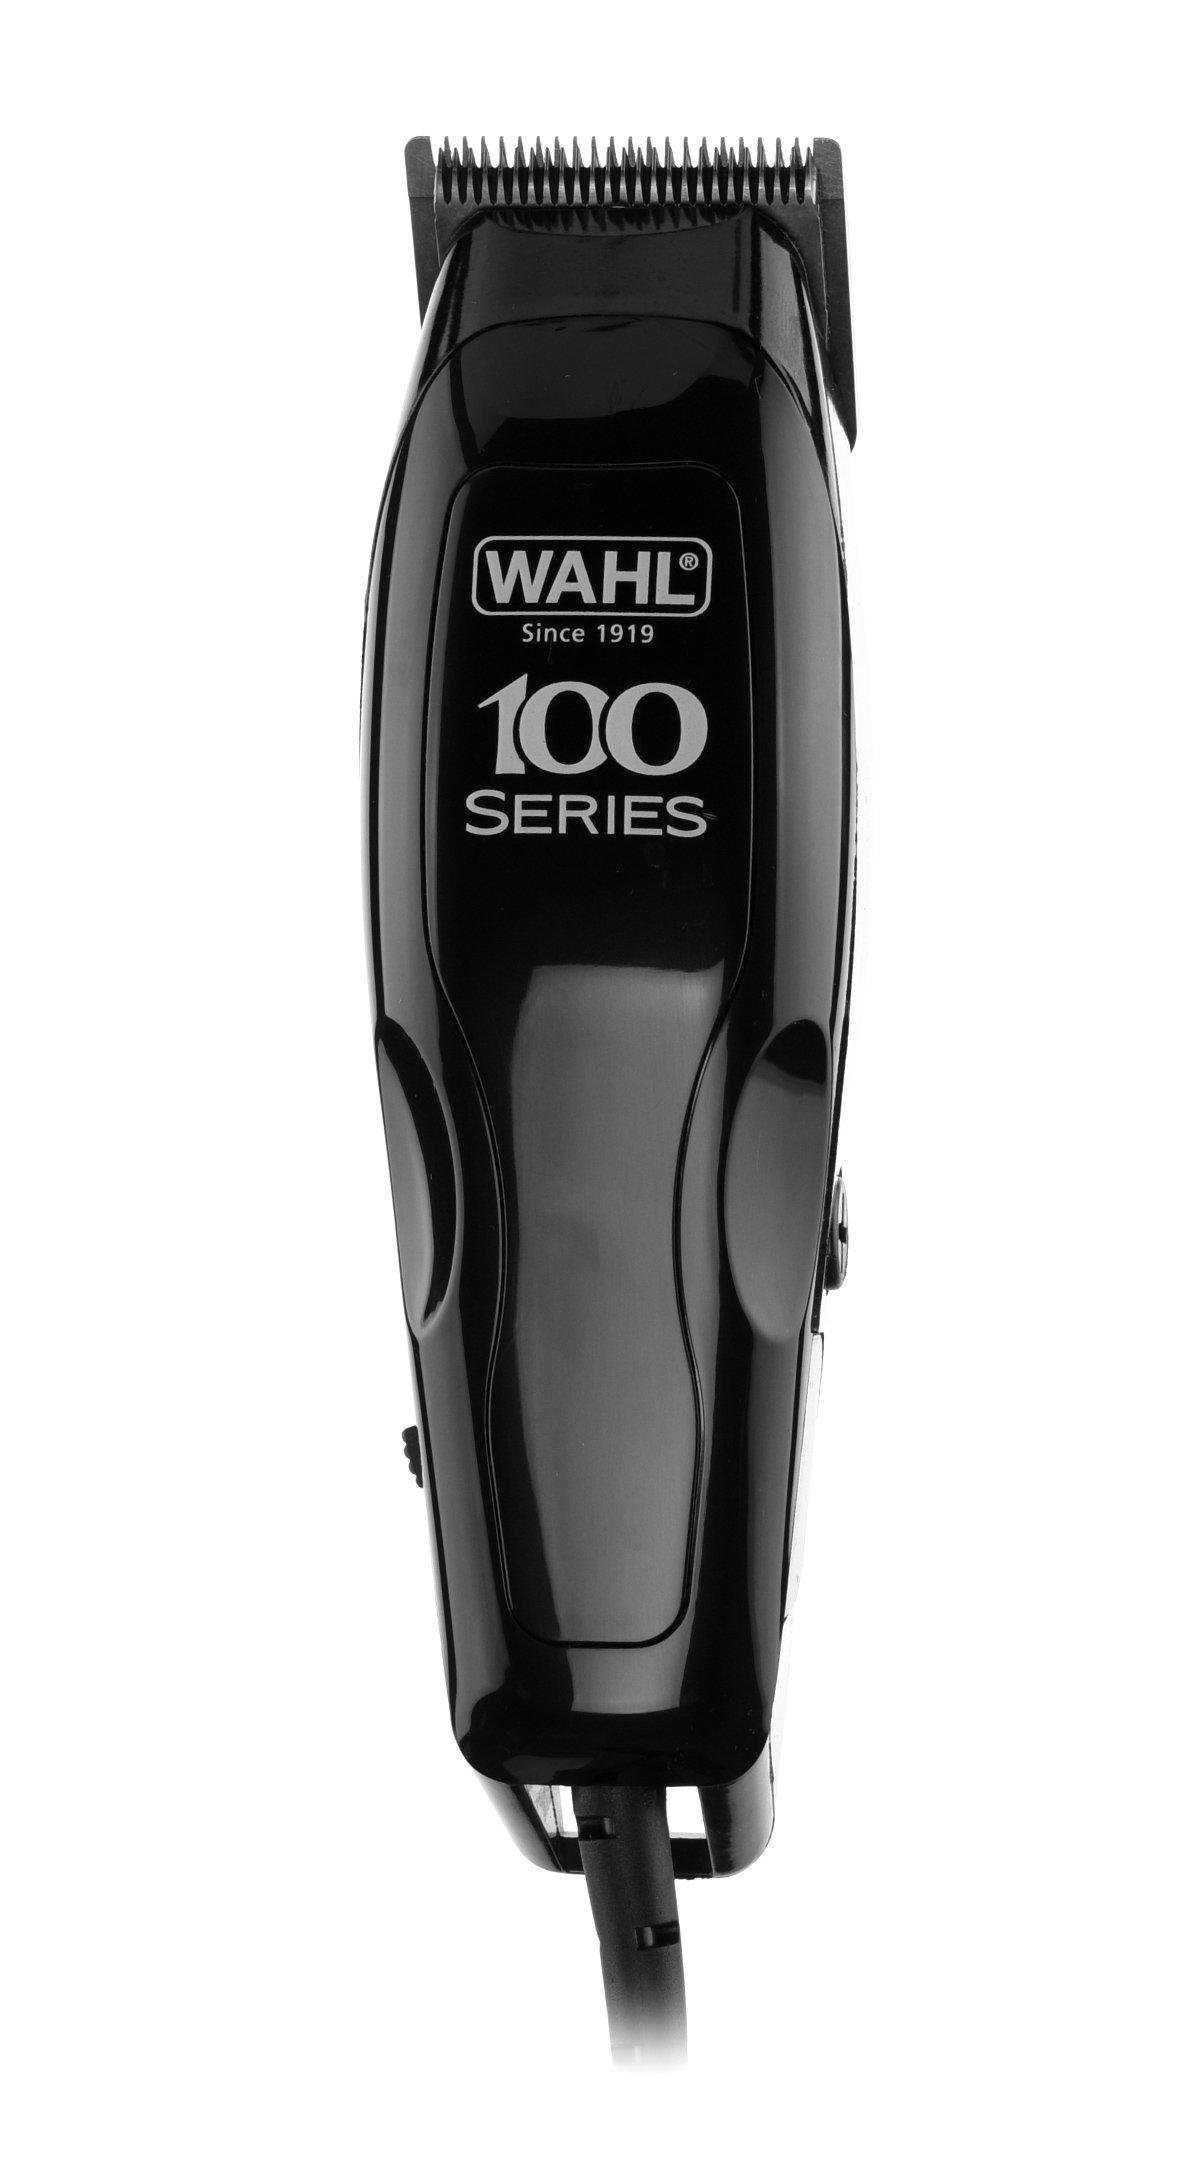 wahl home pro 100 series